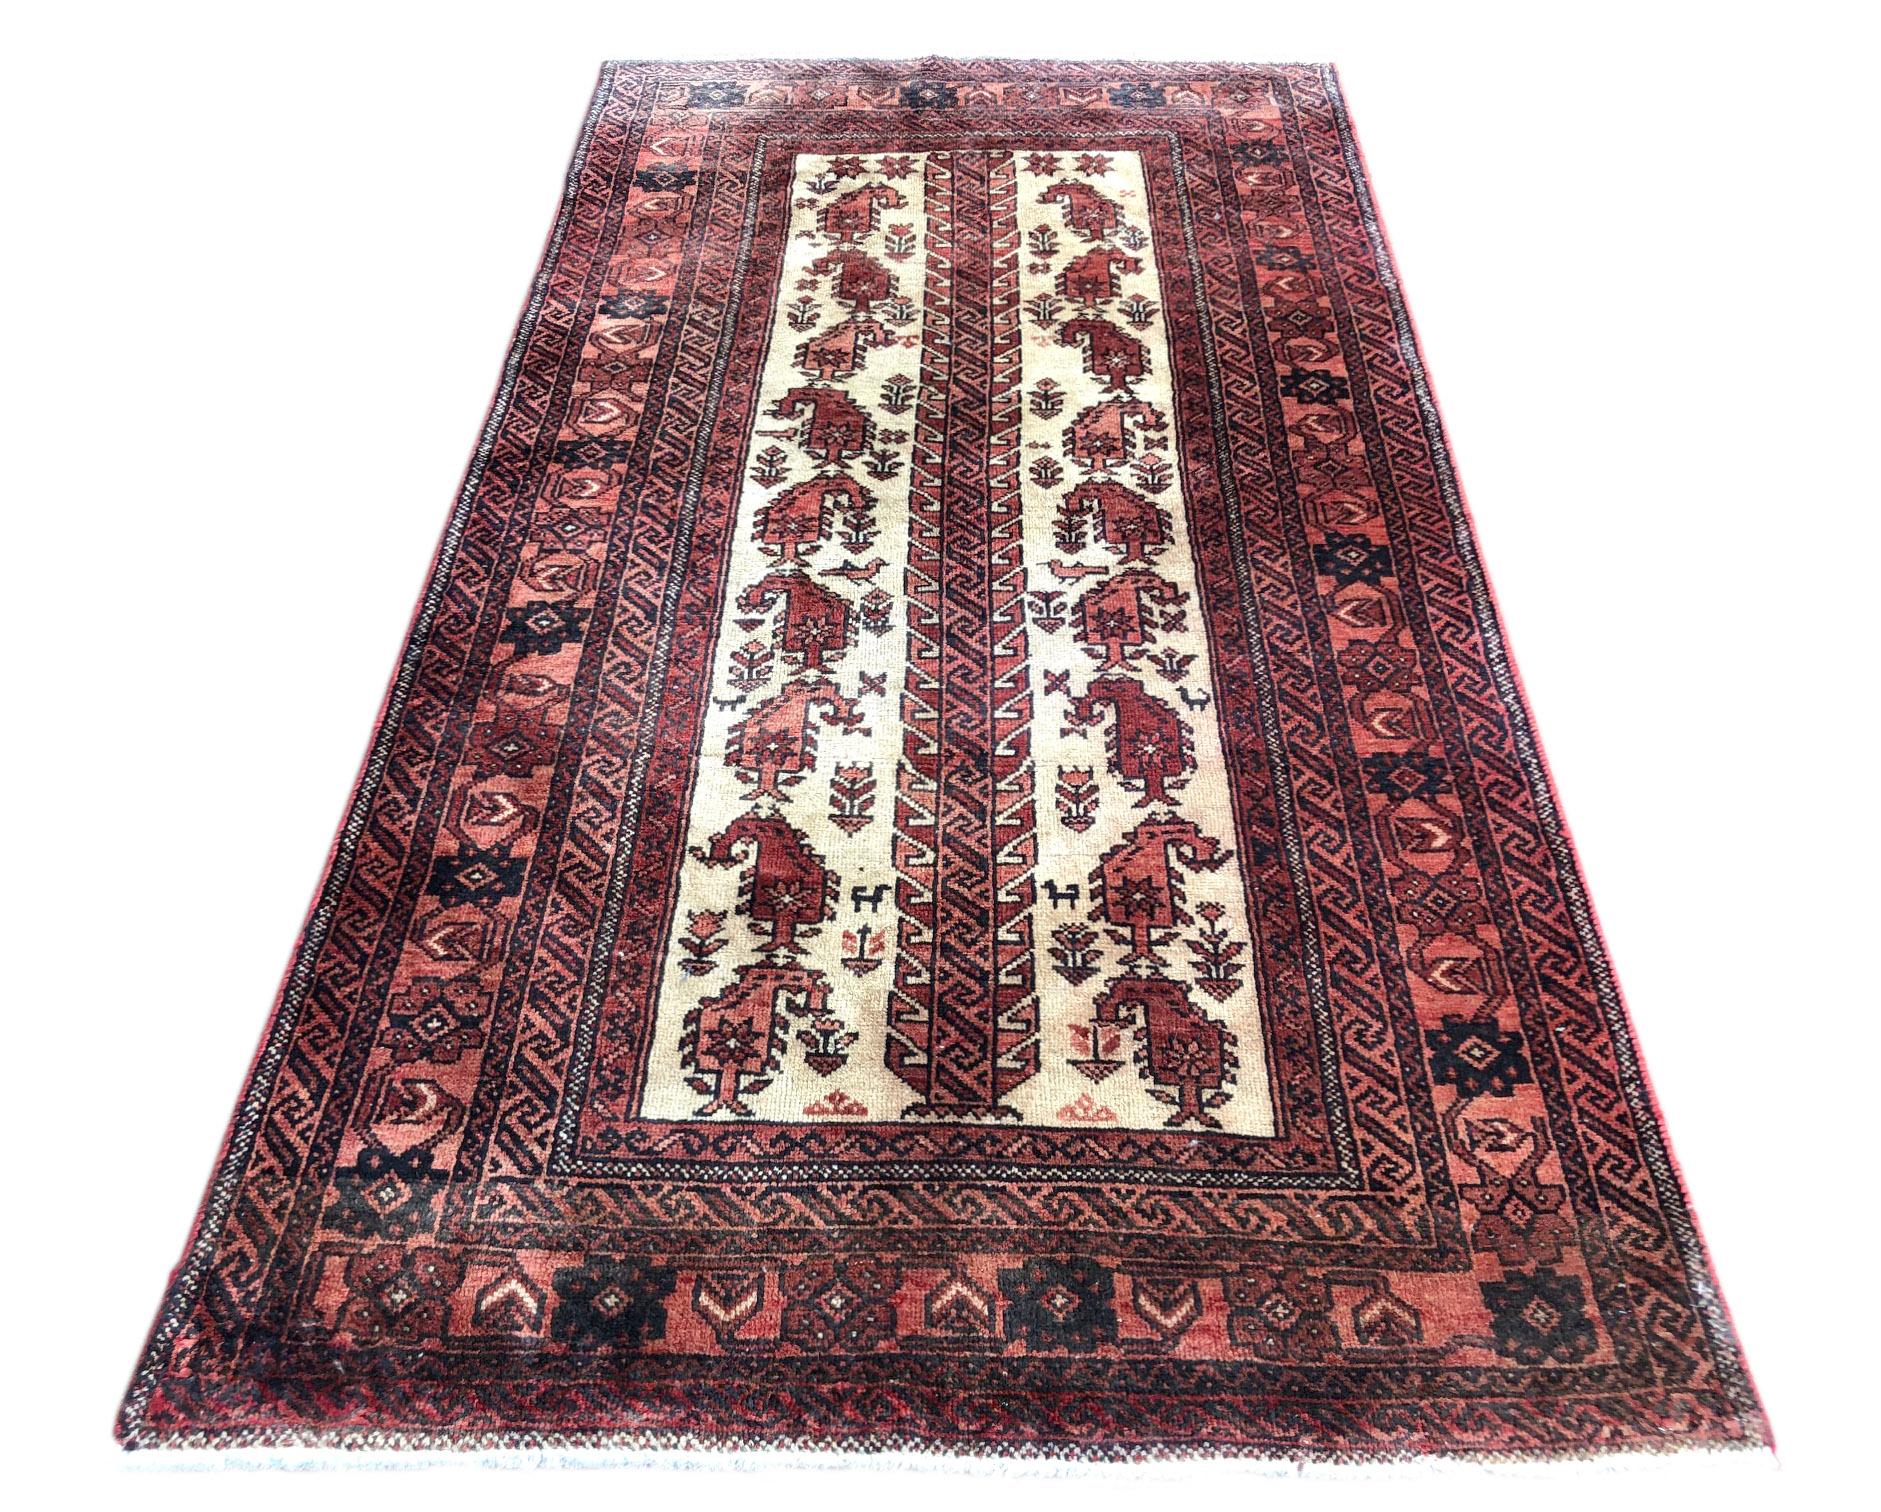 This authentic Persian Baluchi rug has wool pile and cotton foundation which are hand-knotted by the nomads of Baluchi. The age of this rug is almost 50 years old. The size of this rug is 3 feet 5 inches wide by 6 feet 4 inches tall. Baluchi rugs